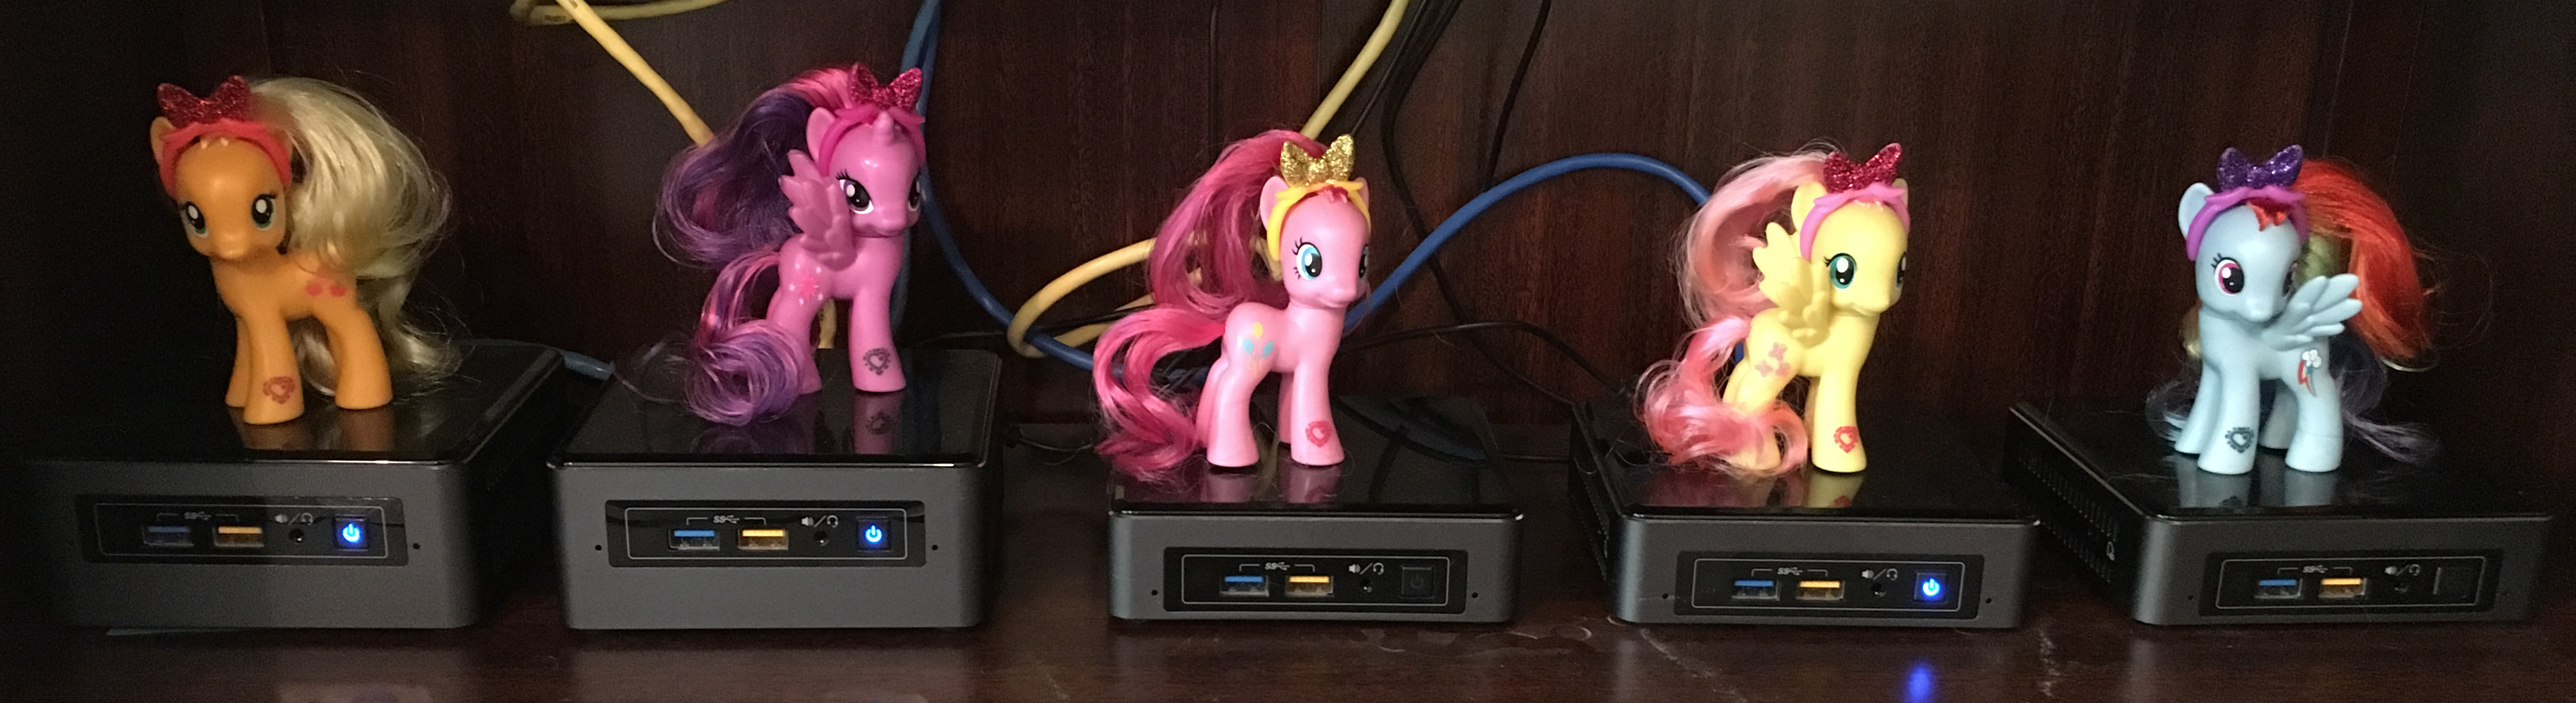 Five Intel NUC computers with My Little Ponies on each one